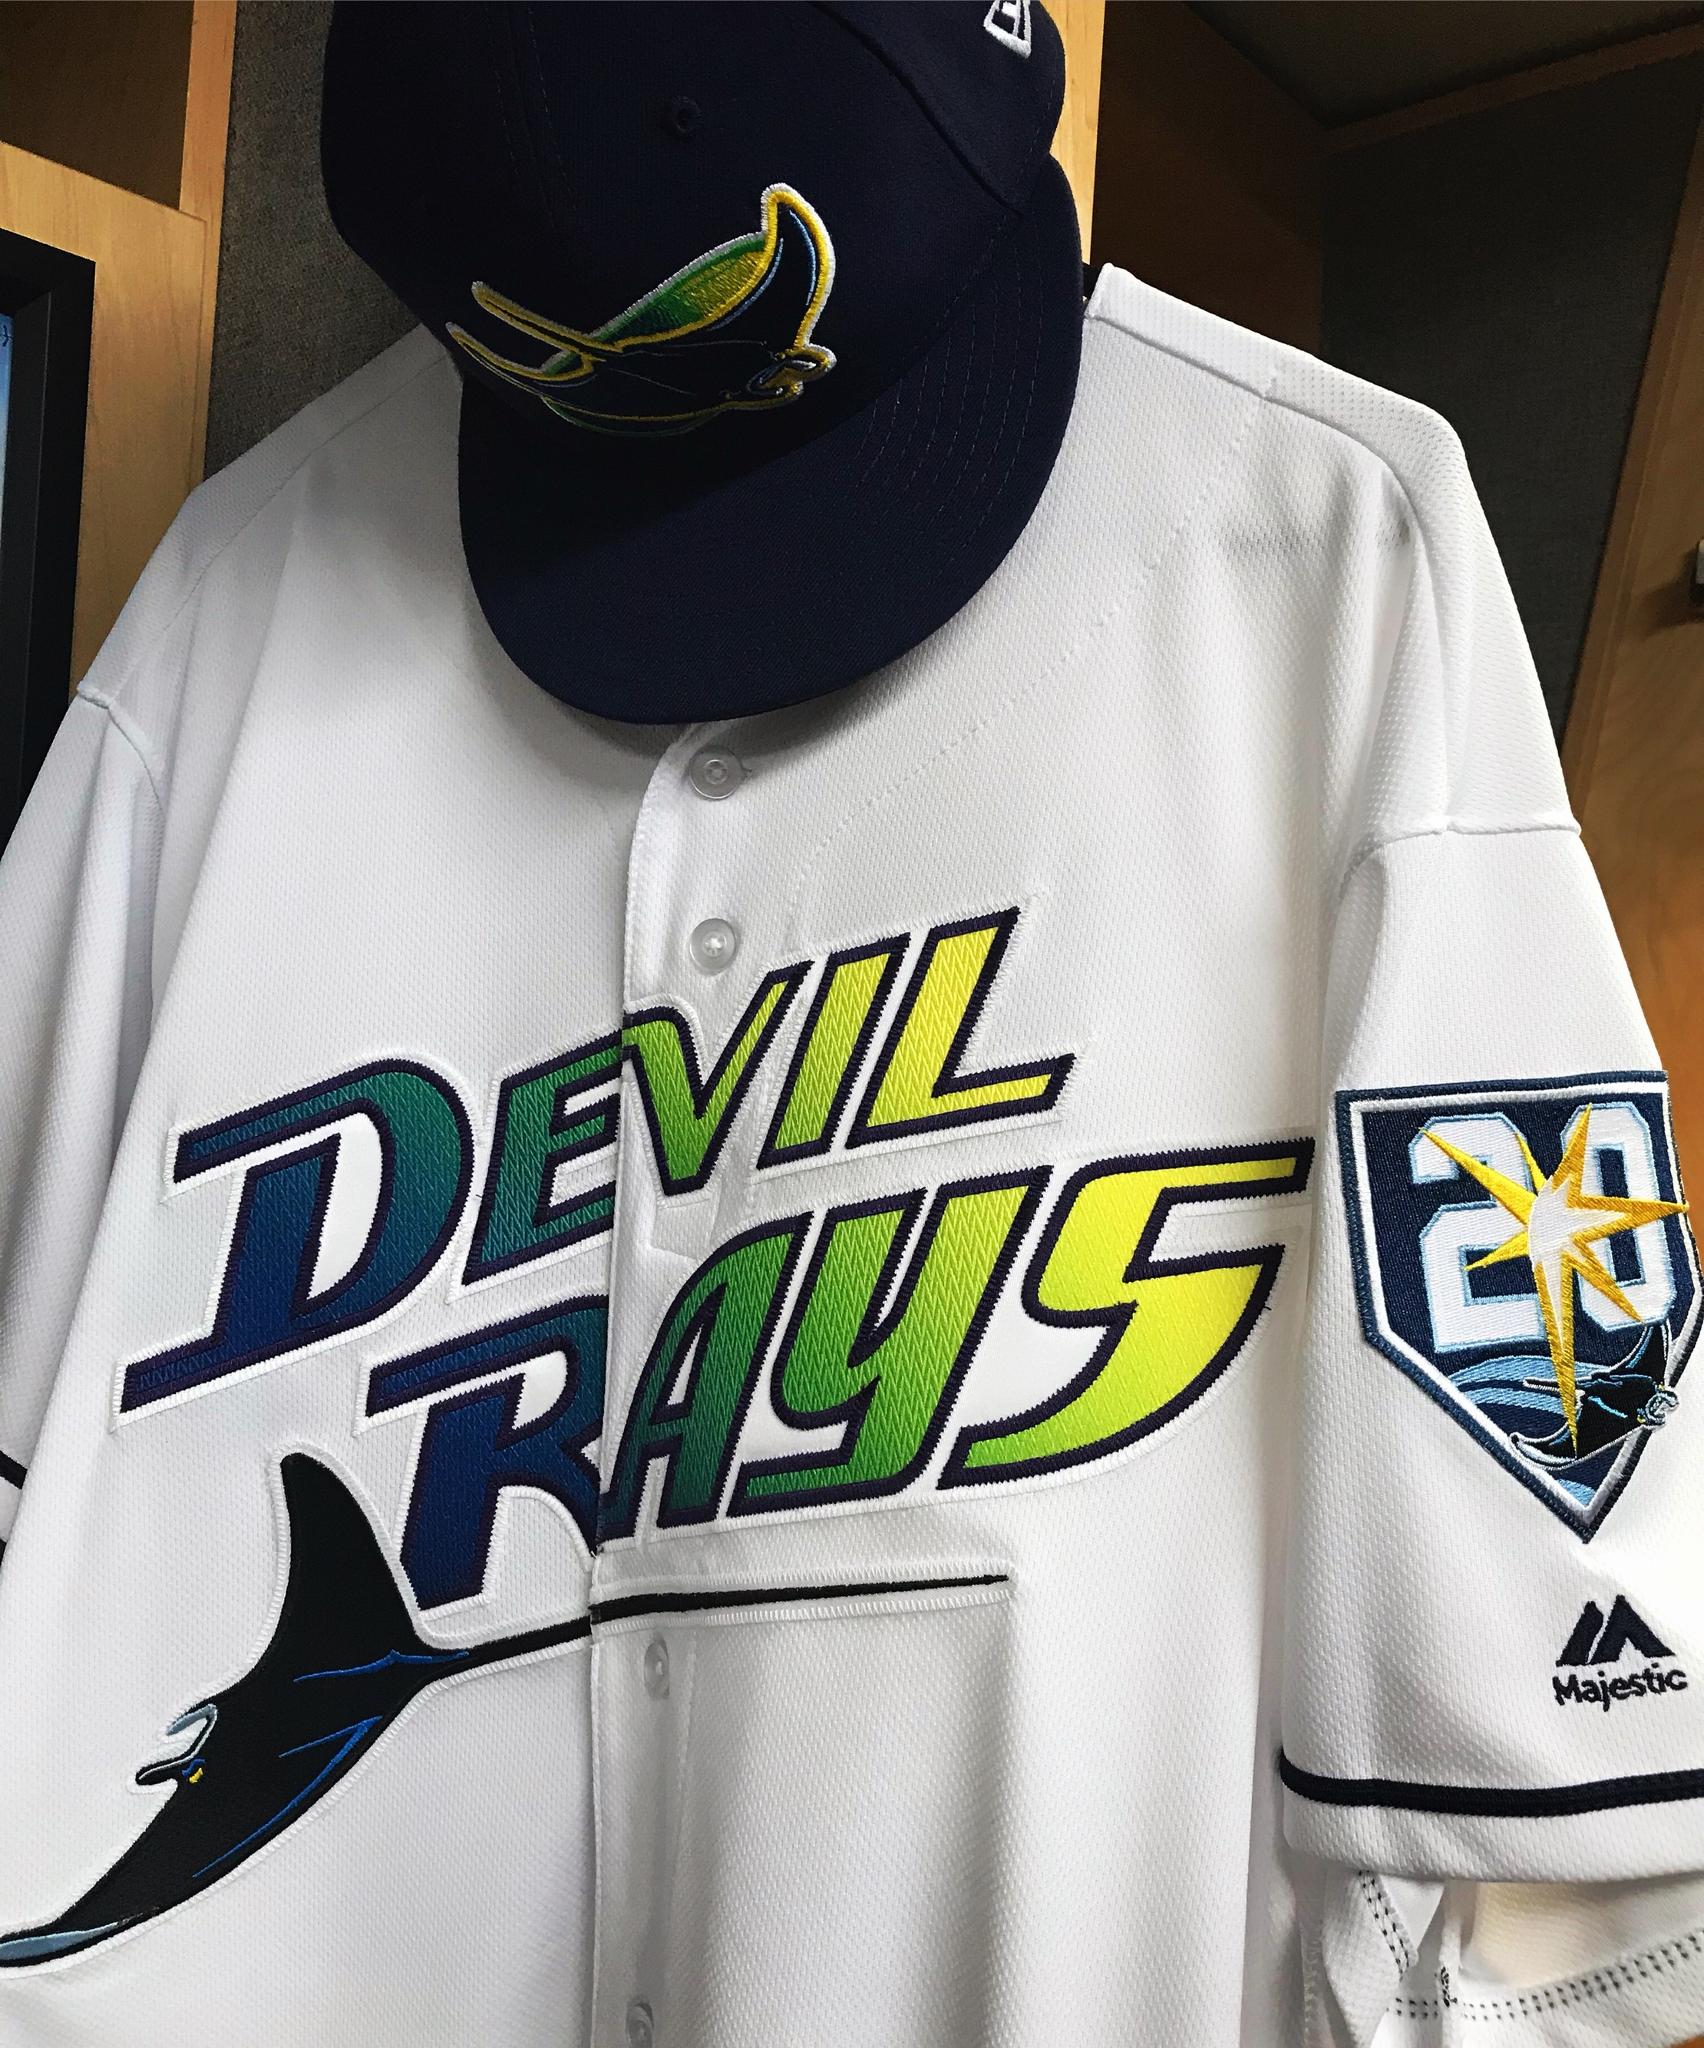 tampa bay devil rays throwback jersey